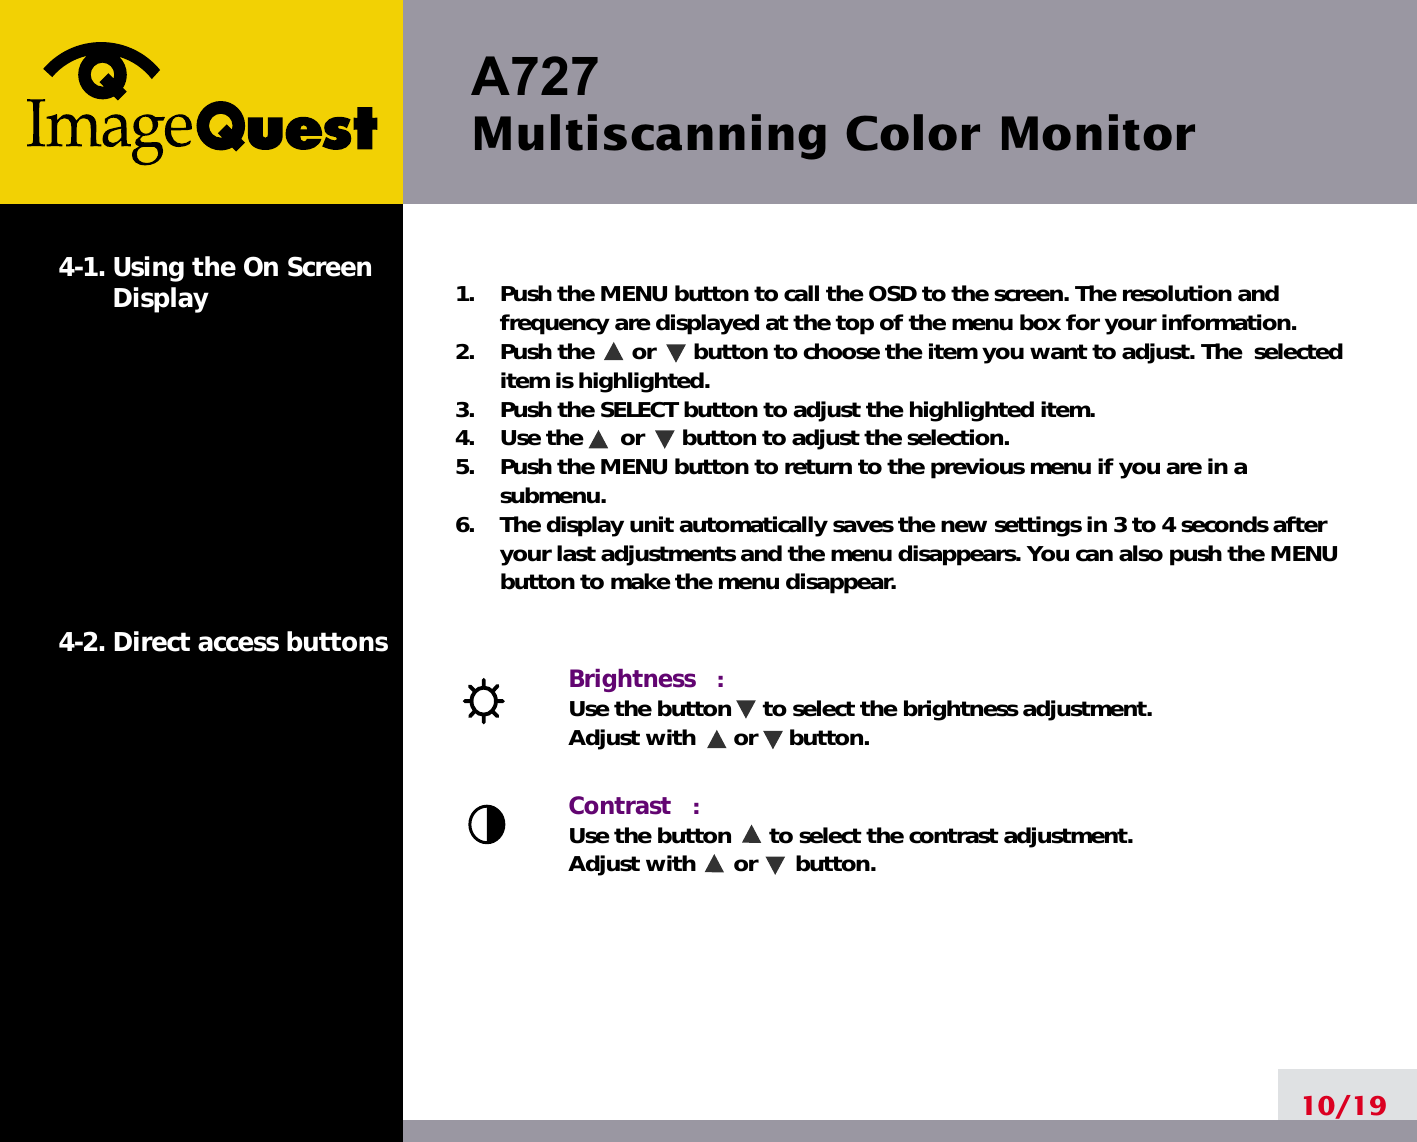 A727Multiscanning Color Monitor10/191.    Push the MENU button to call the OSD to the screen. The resolution andfrequency are displayed at the top of the menu box for your information.2.    Push the      or      button to choose the item you want to adjust. The  selecteditem is highlighted.3.    Push the SELECT button to adjust the highlighted item. 4.    Use the      or      button to adjust the selection.5.    Push the MENU button to return to the previous menu if you are in asubmenu.6.    The display unit automatically saves the new settings in 3 to 4 seconds afteryour last adjustments and the menu disappears. You can also push the MENUbutton to make the menu disappear.Brightness   :  Use the button     to select the brightness adjustment. Adjust with      or     button.Contrast   :  Use the button      to select the contrast adjustment. Adjust with      or      button.4-1. Using the On ScreenDisplay 4-2. Direct access buttons